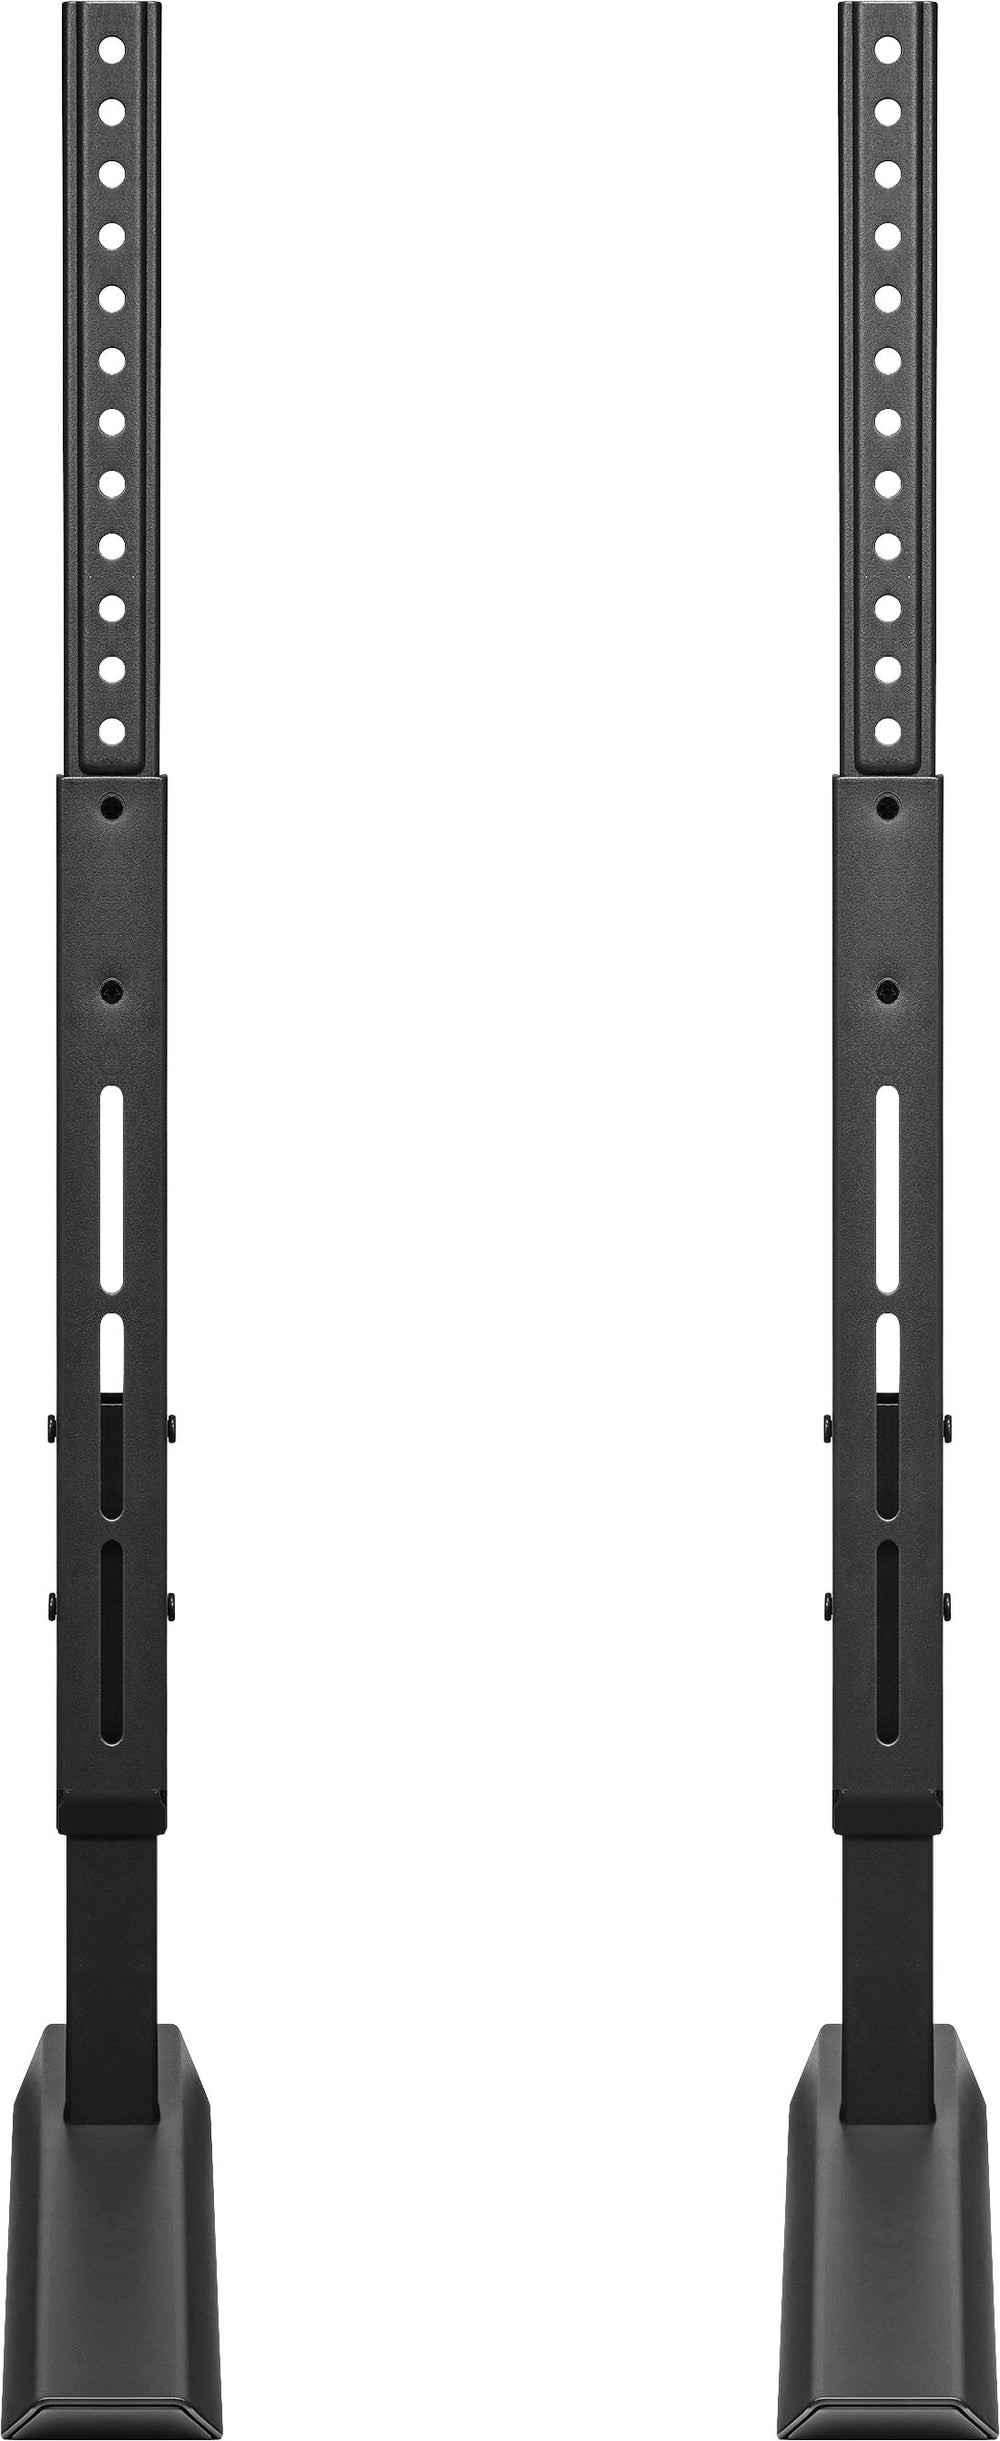 Insignia™ - Universal TV Feet Replacement Kit for TVs 49"-77" or 100 lbs - Black_1